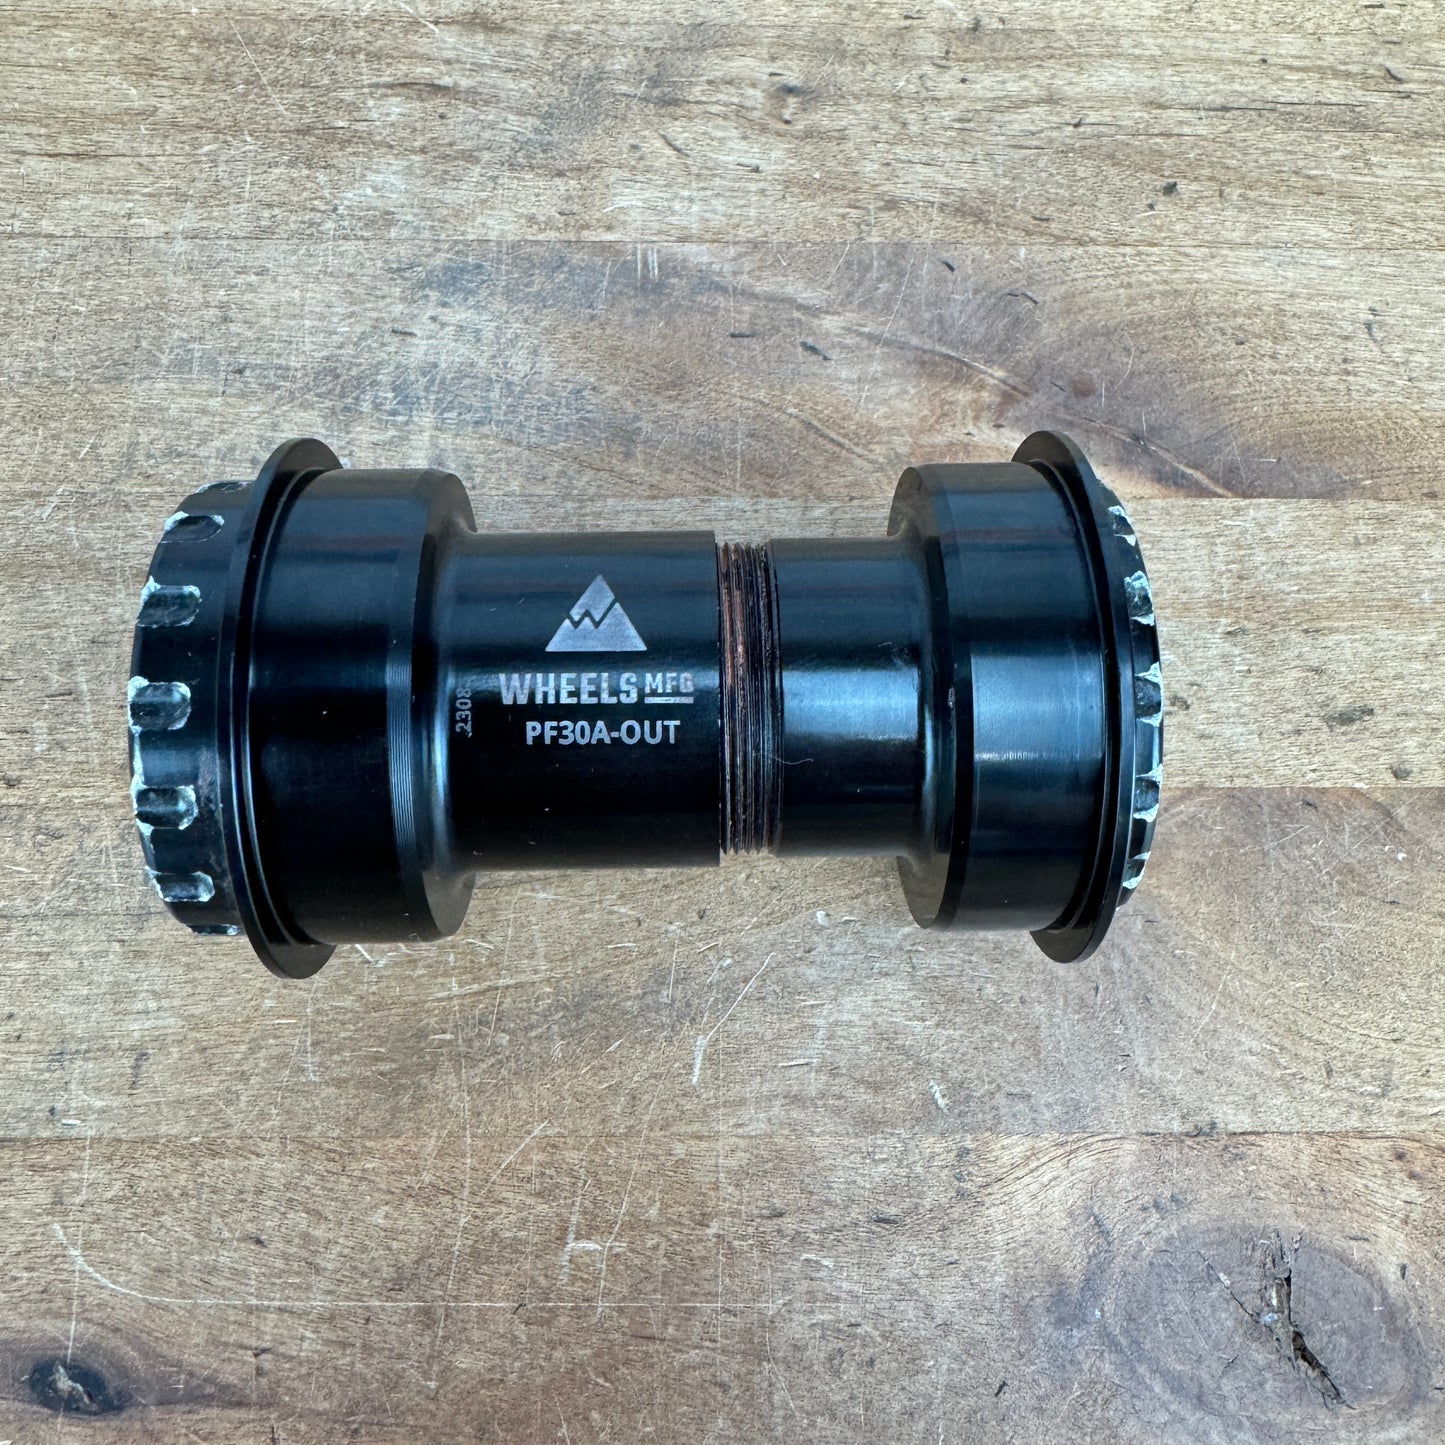 Wheels Manufacturing for Cannondale PF30a Sram GXP Spindle Bike Bottom Bracket